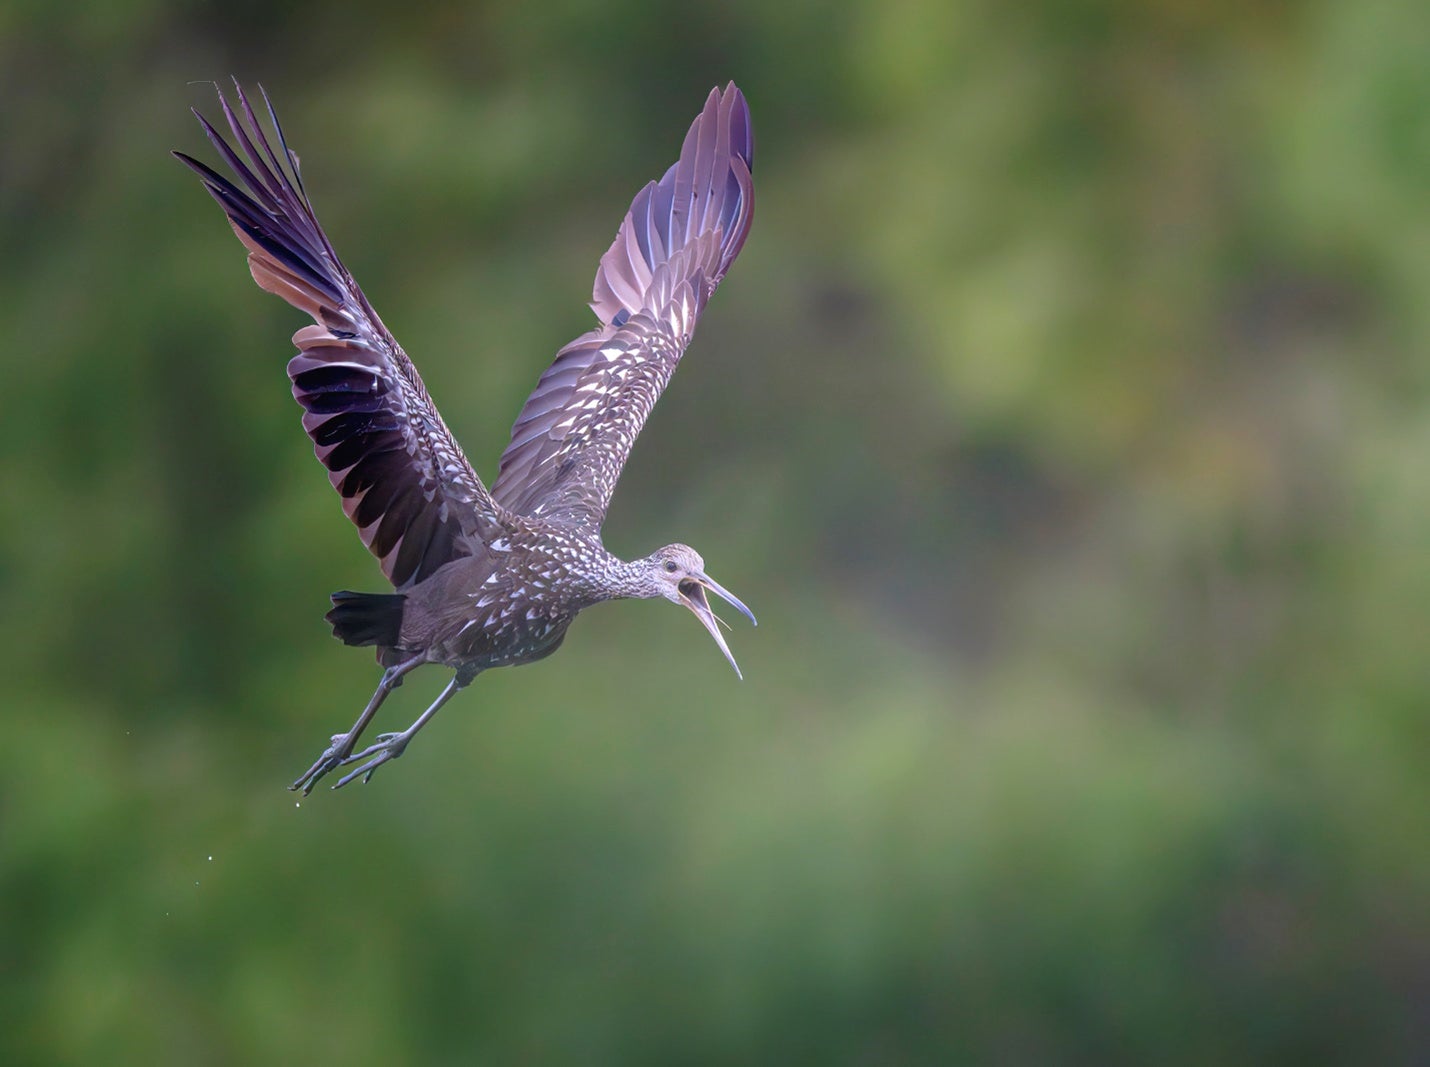 “The Limpkin's aerial ballet, Texas.” Photo by Raj Bose. Sony Alpha 1. Sony 600mm f/4 G Master. 1/5000-sec., f/5.6, ISO 12800